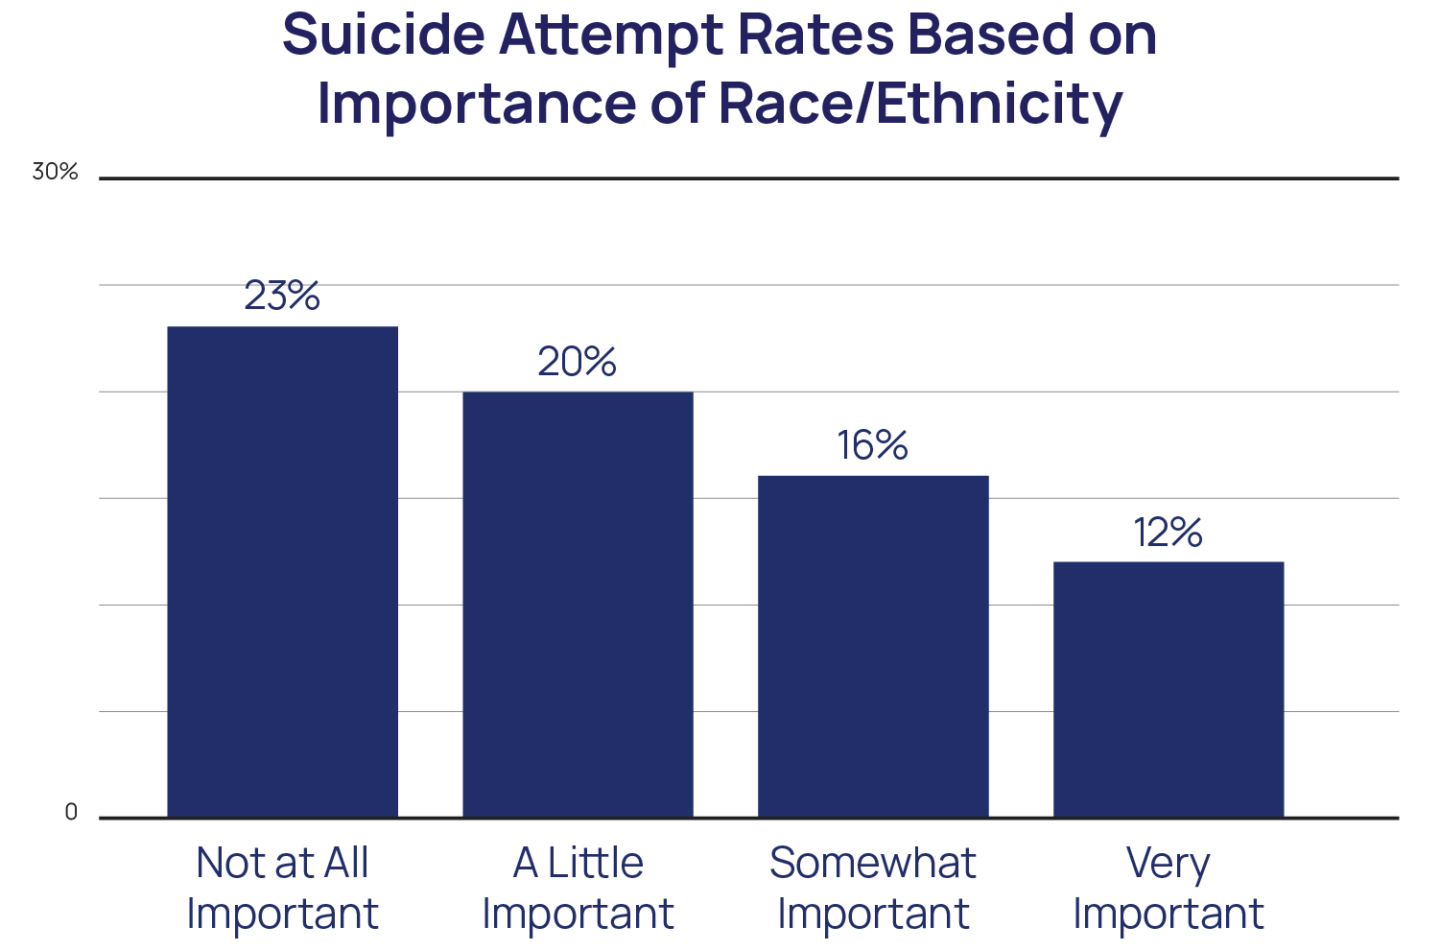 Suicide attempt rates based on importance of race/ethnicity bar chart